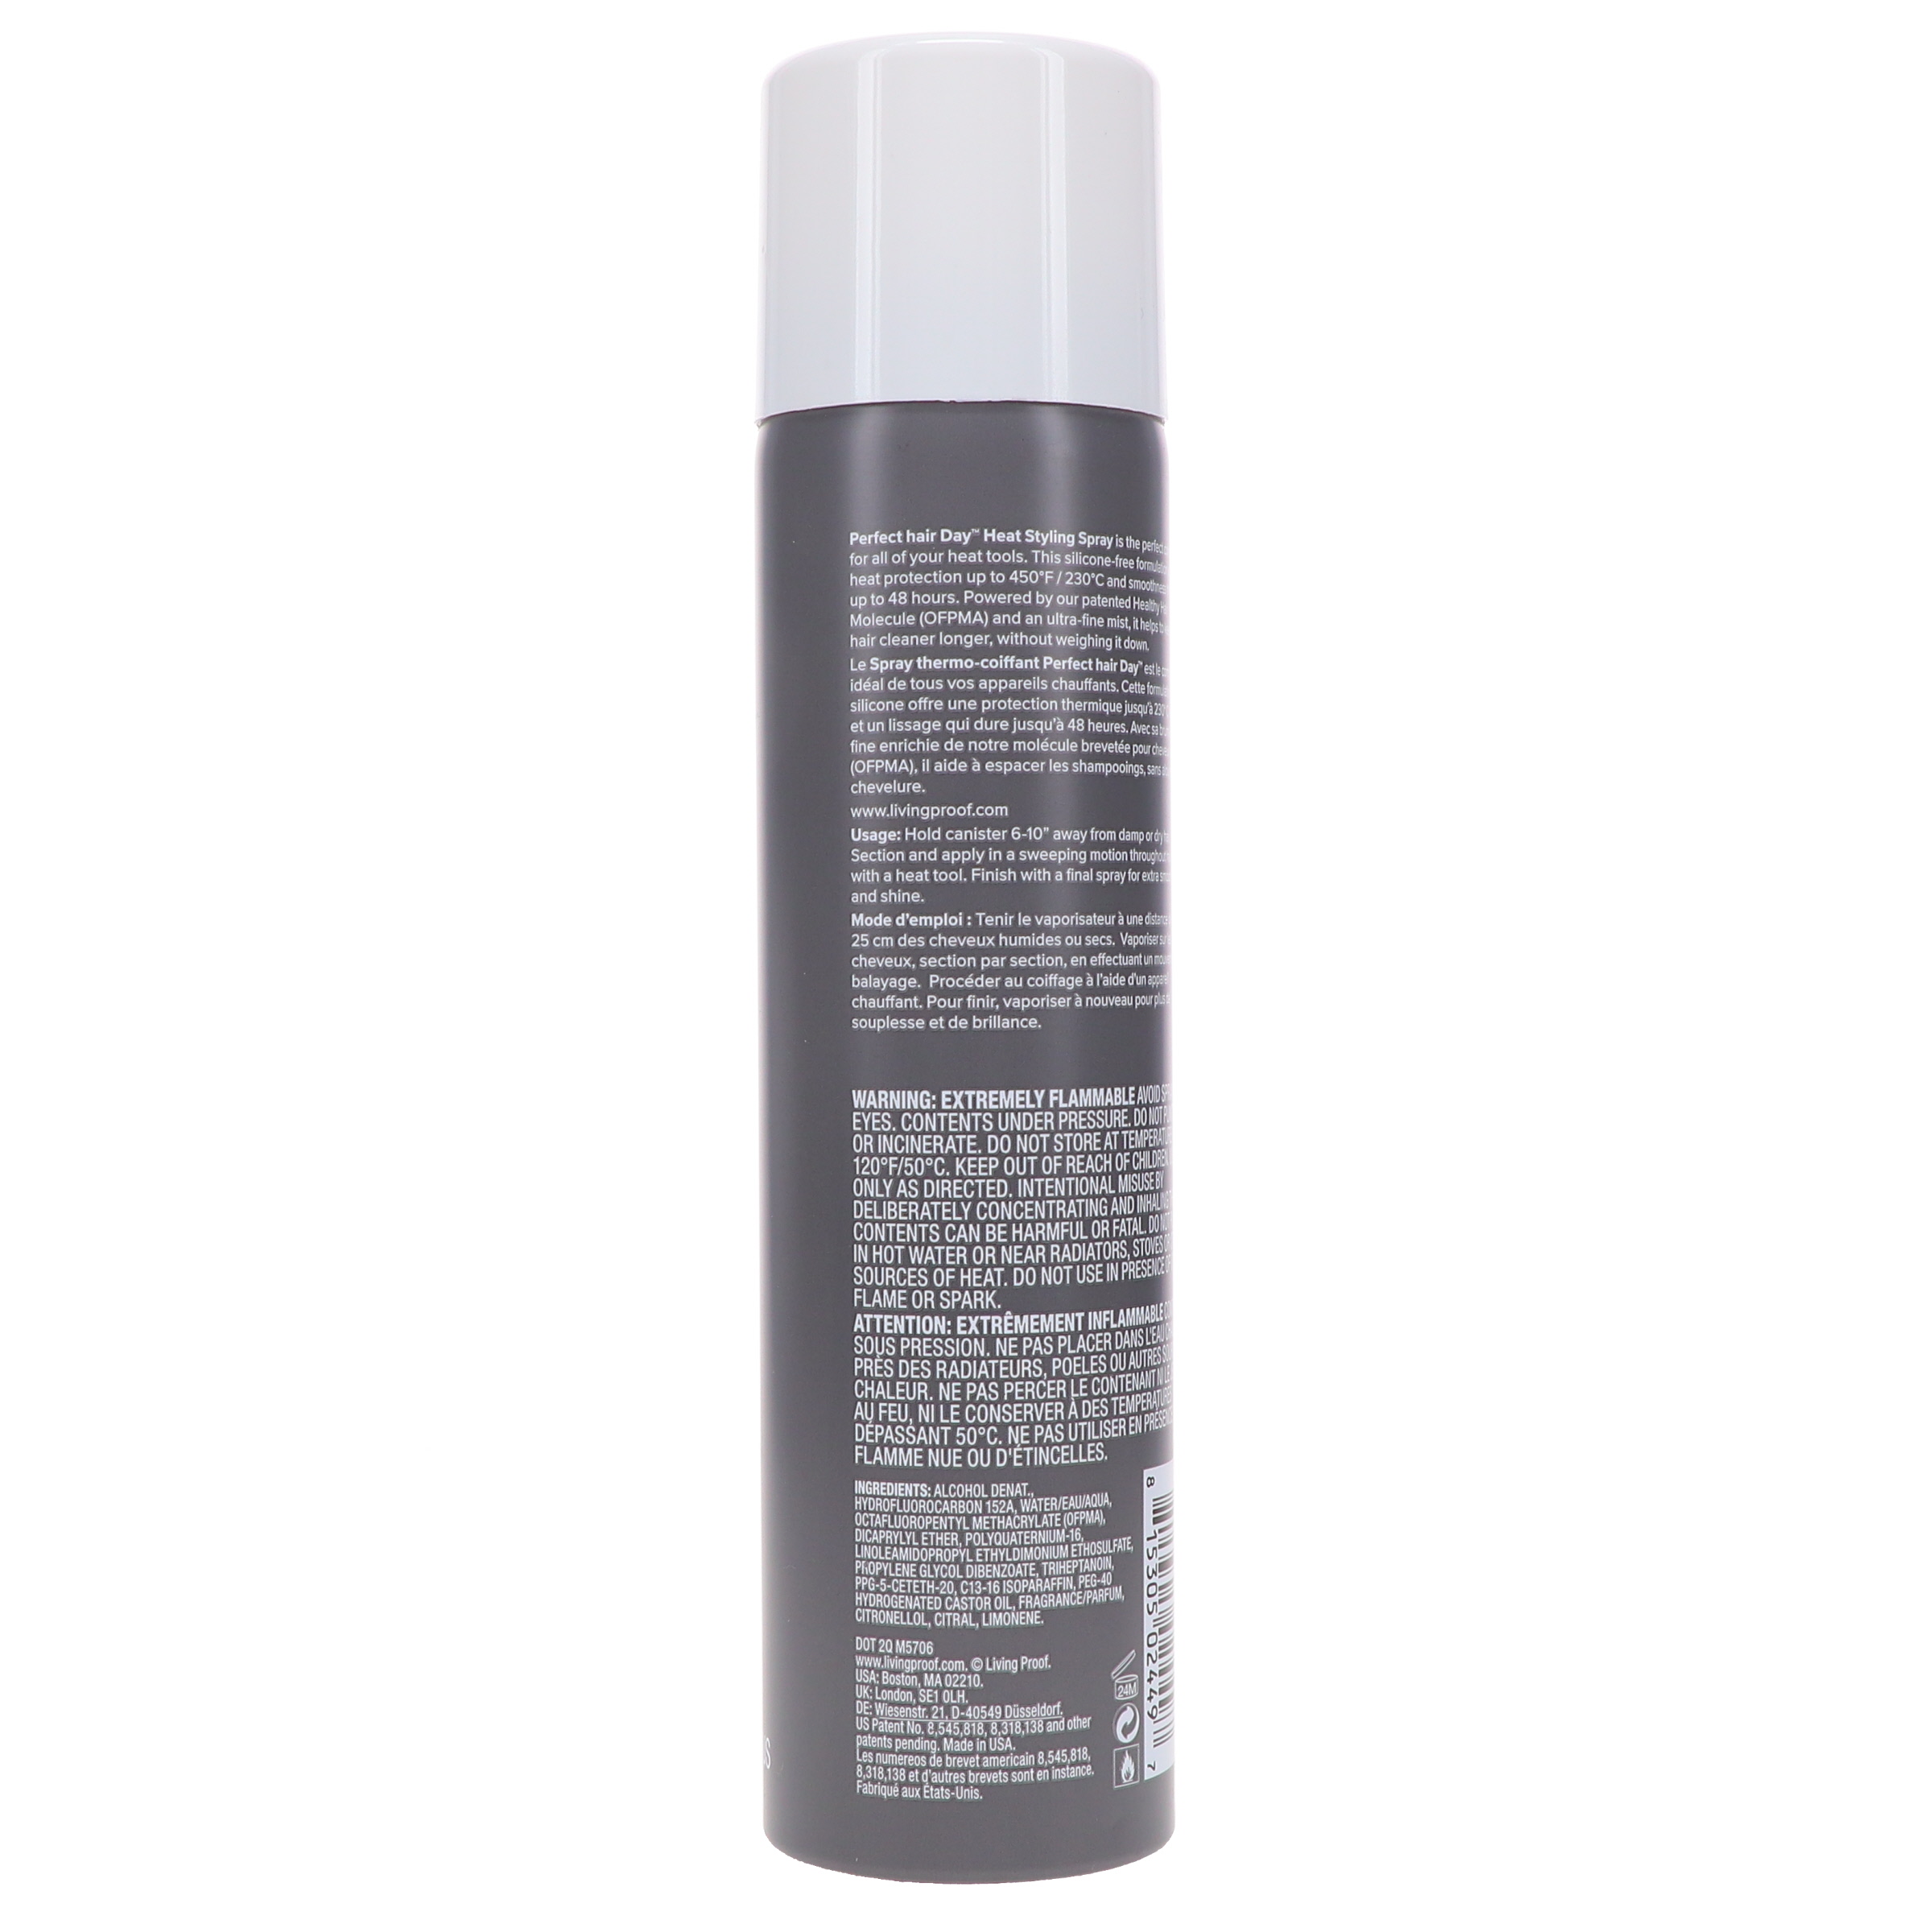 Living Proof Perfect Hair Day Heat Styling Spray 5.5 oz - image 4 of 7